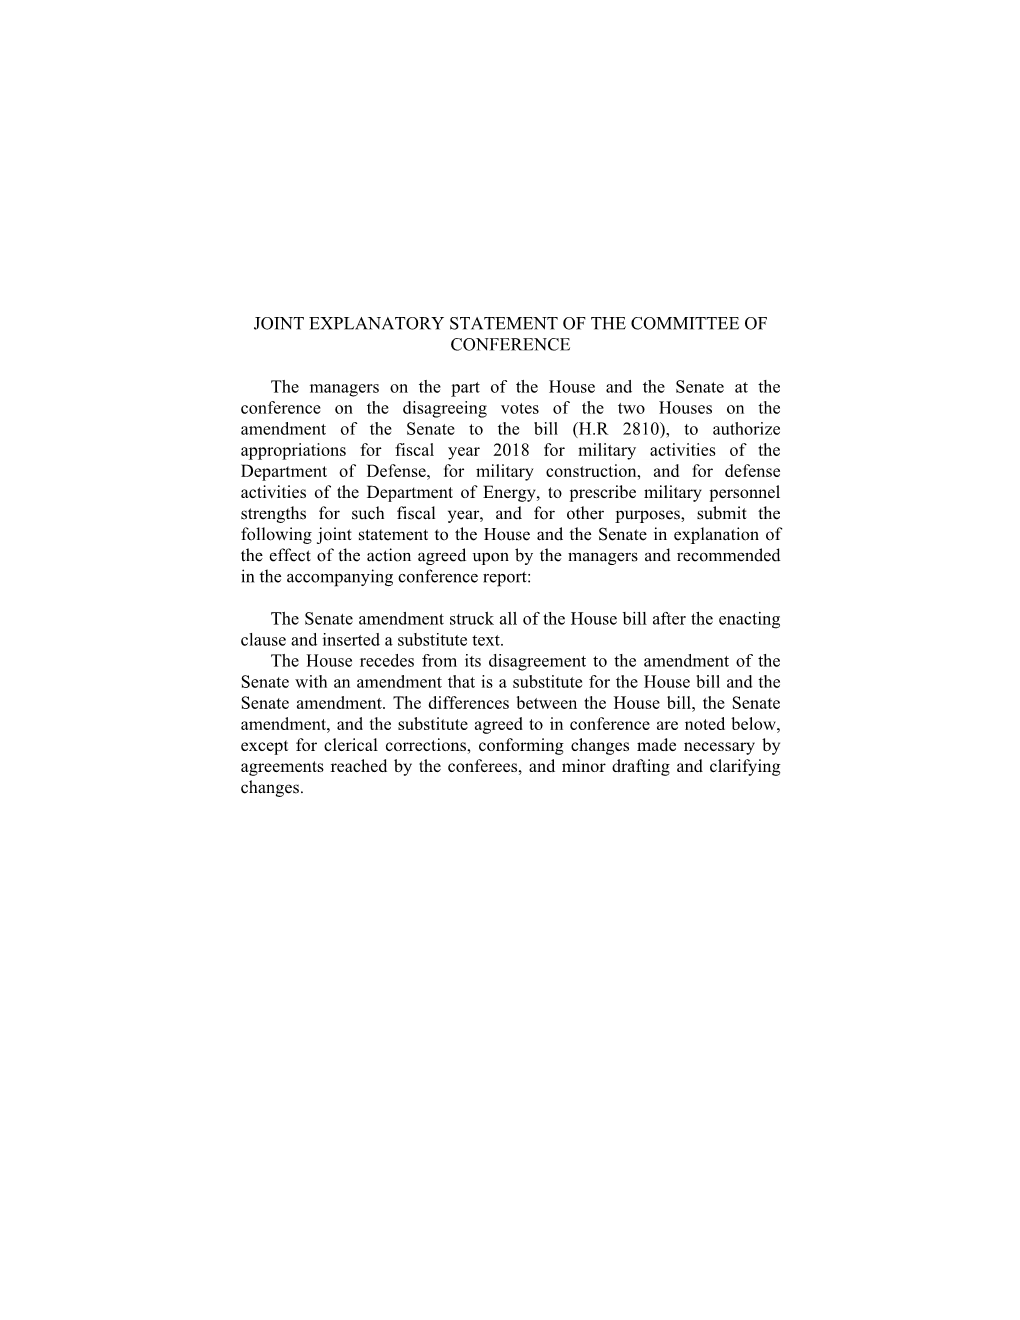 Joint Explanatory Statement of the Committee of Conference